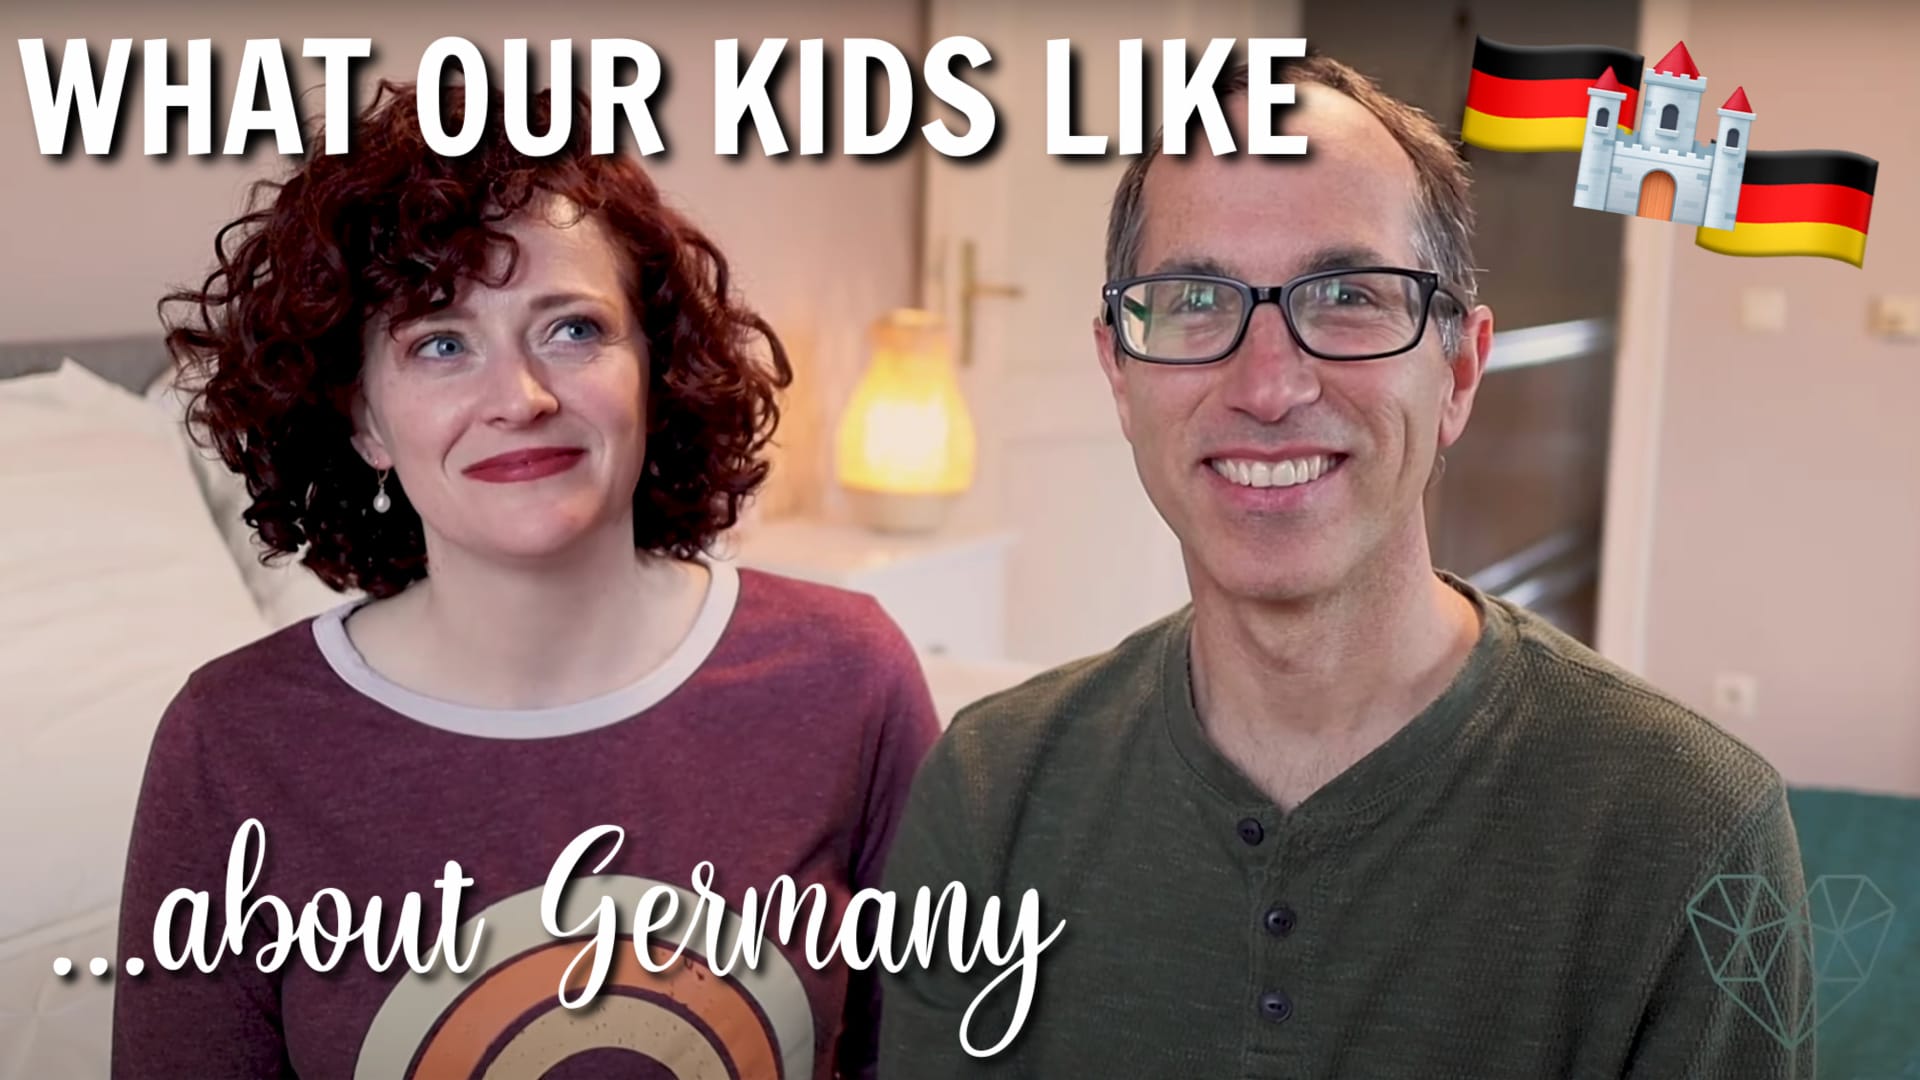 What's It Like For American Kids to Live in Germany? We share our experience as American immigrants living in Germany with four young kids.